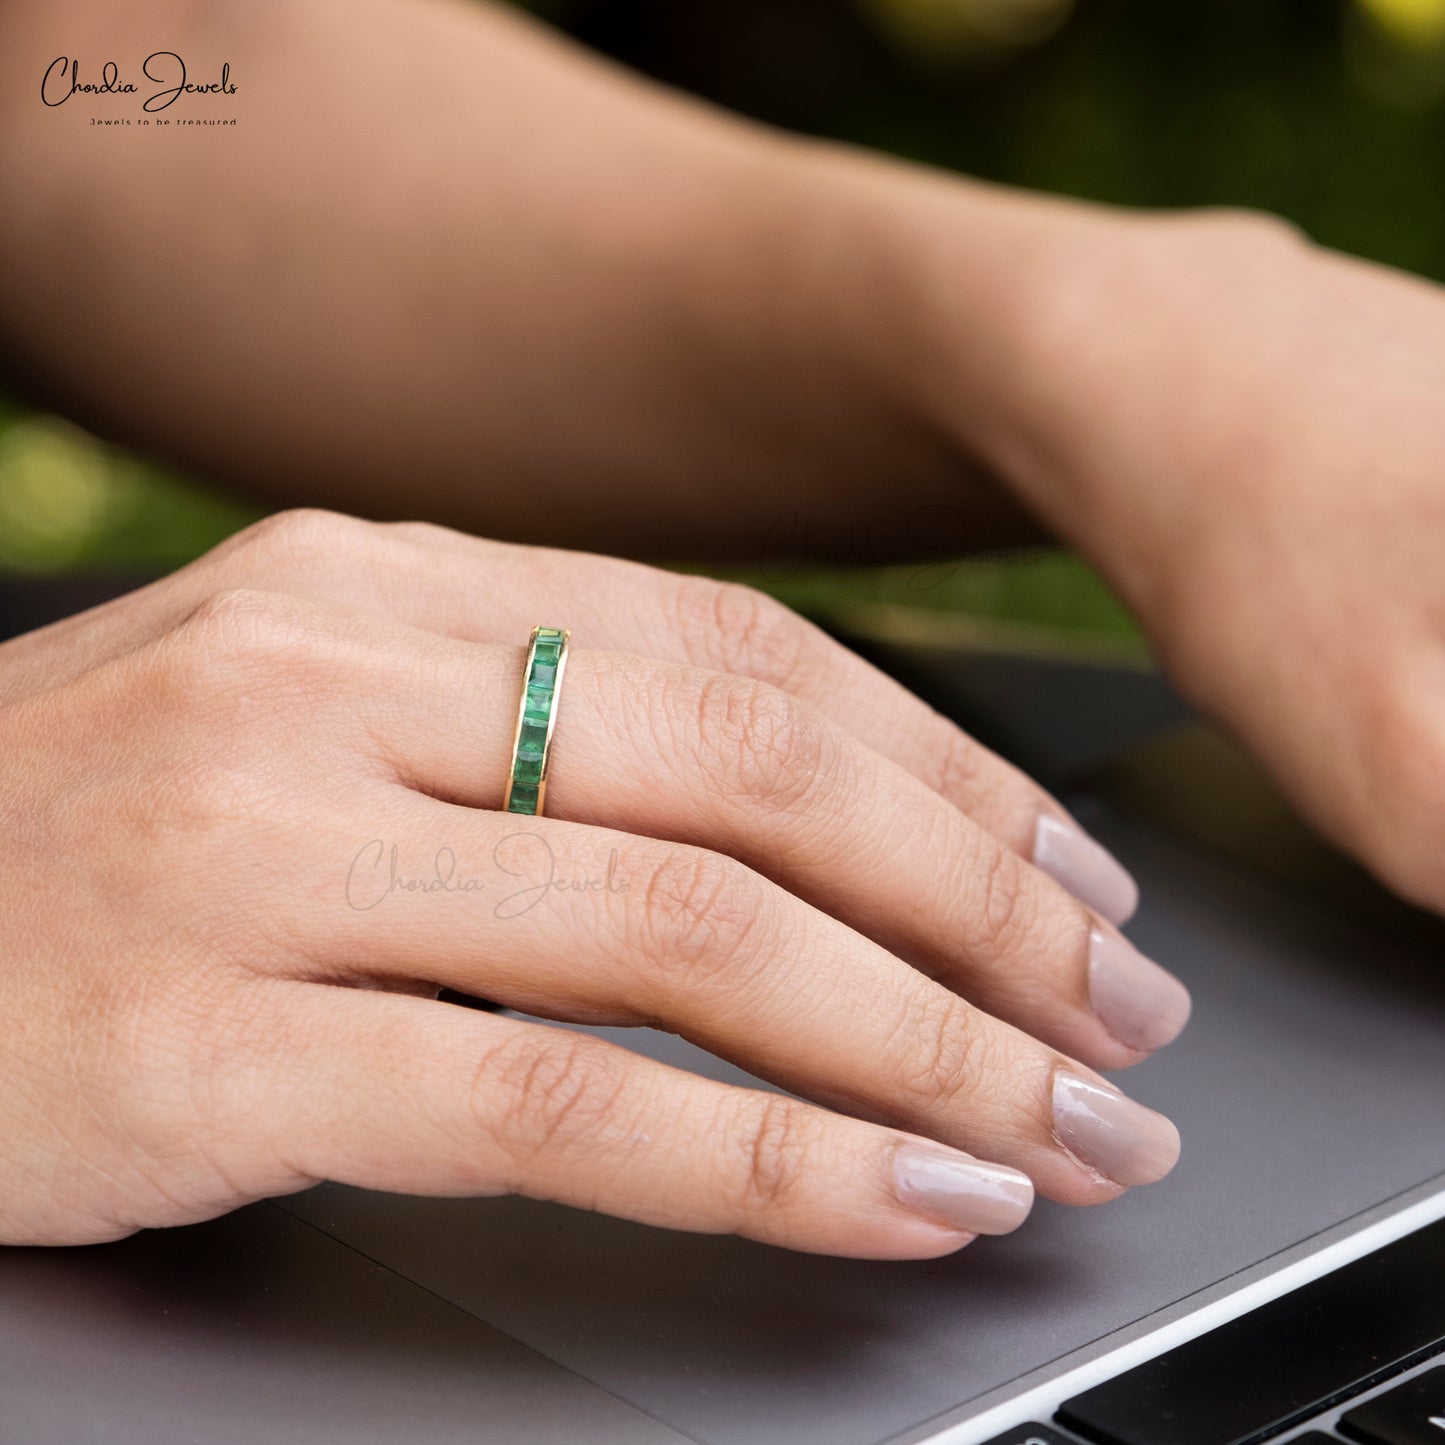 Transform your style with our emerald eternity ring.